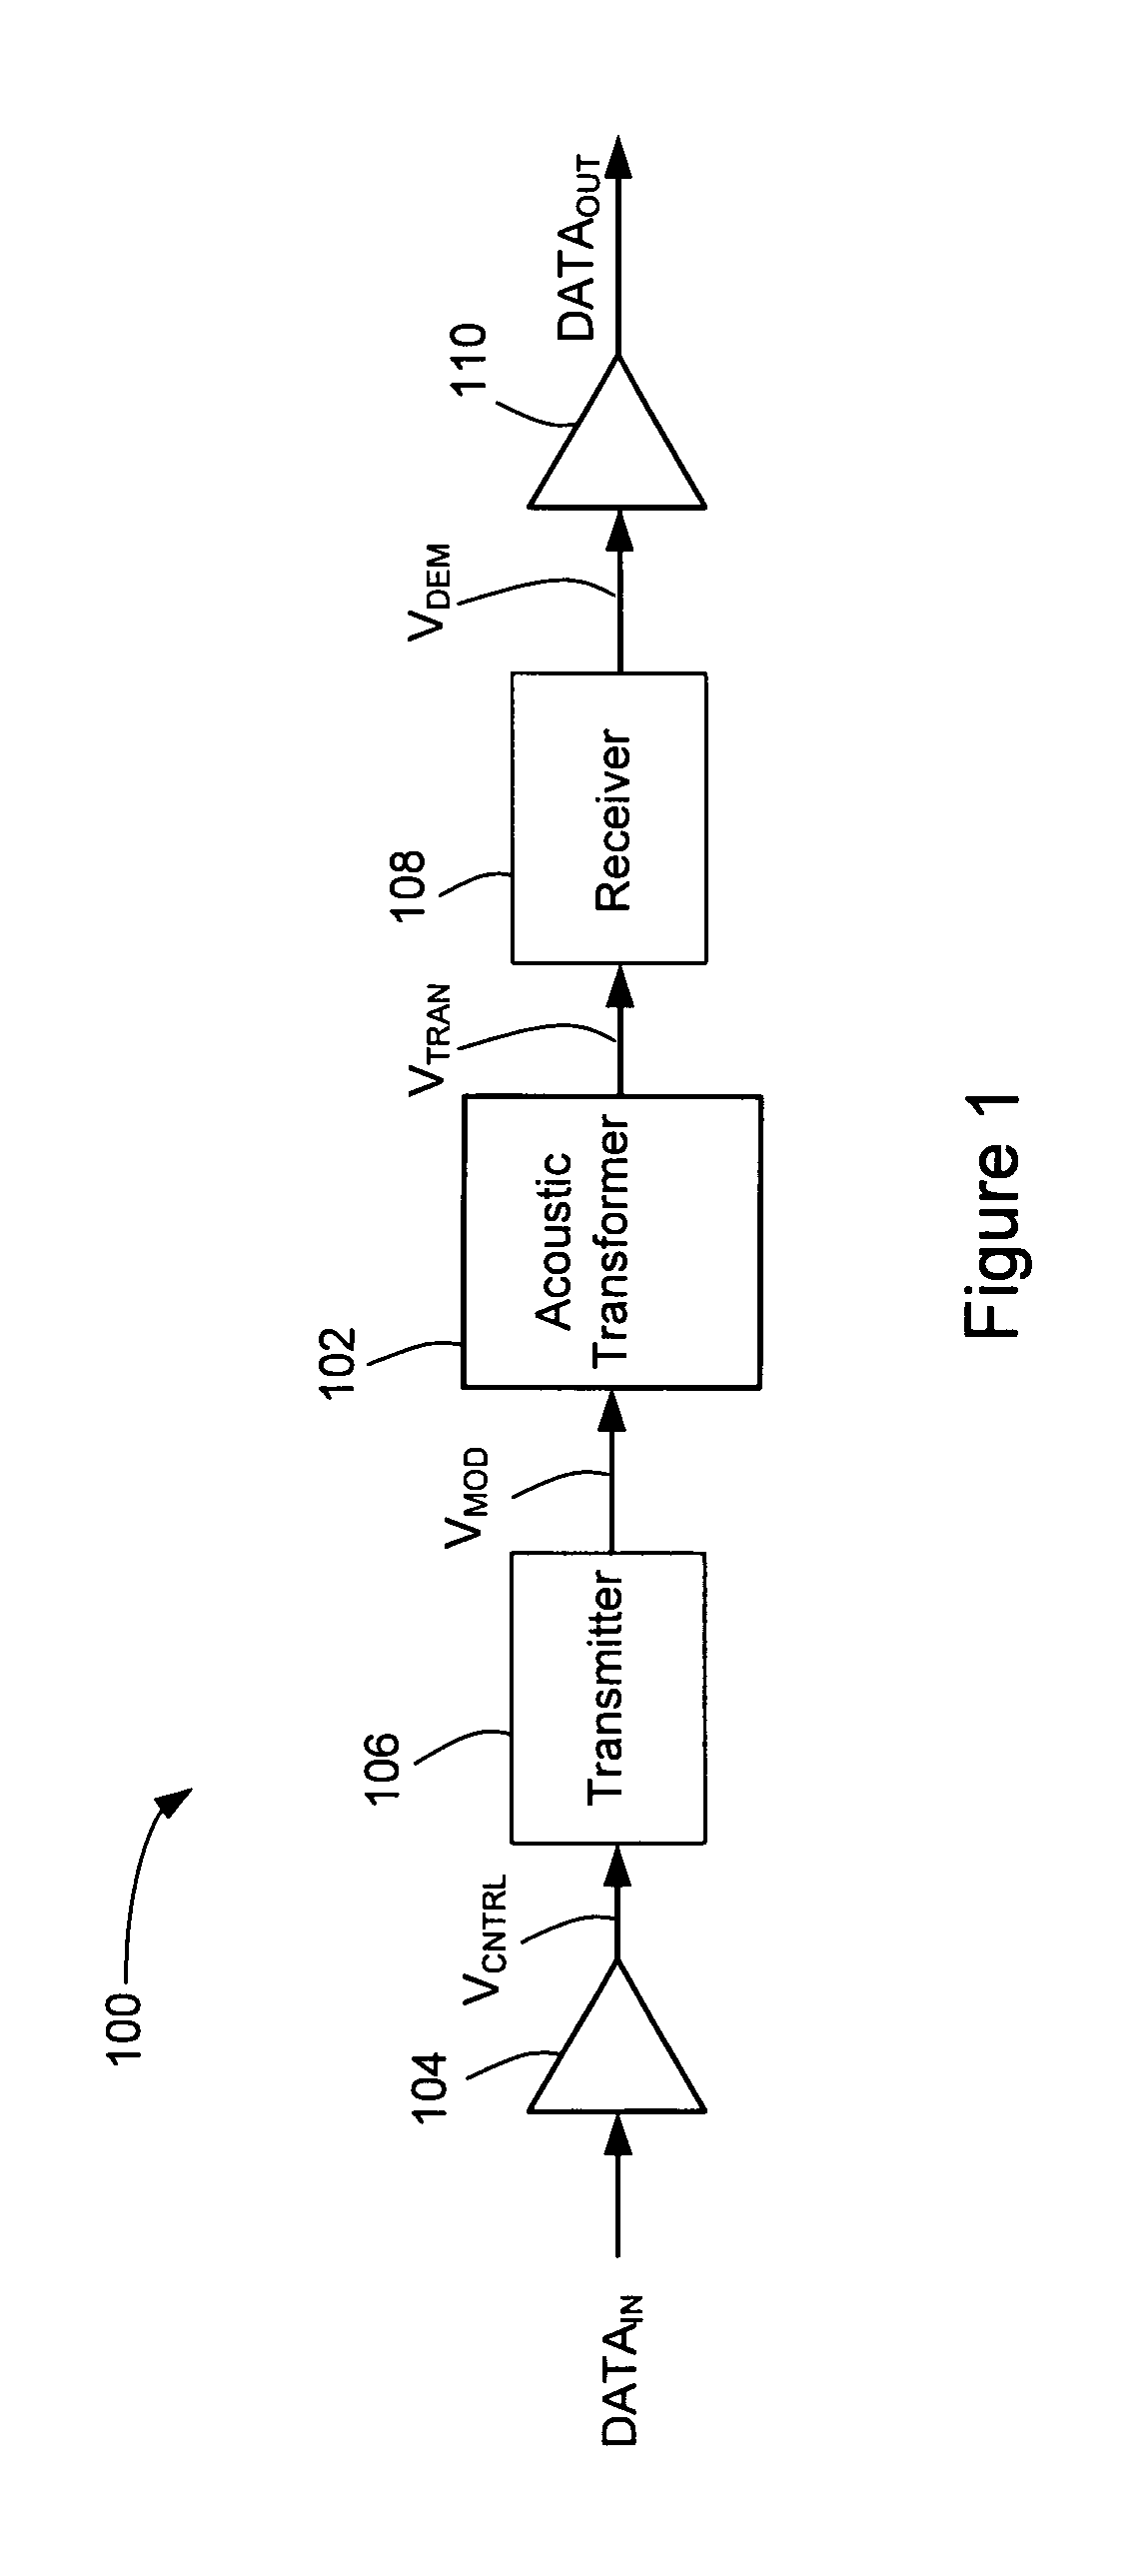 Acoustic data coupling system and method